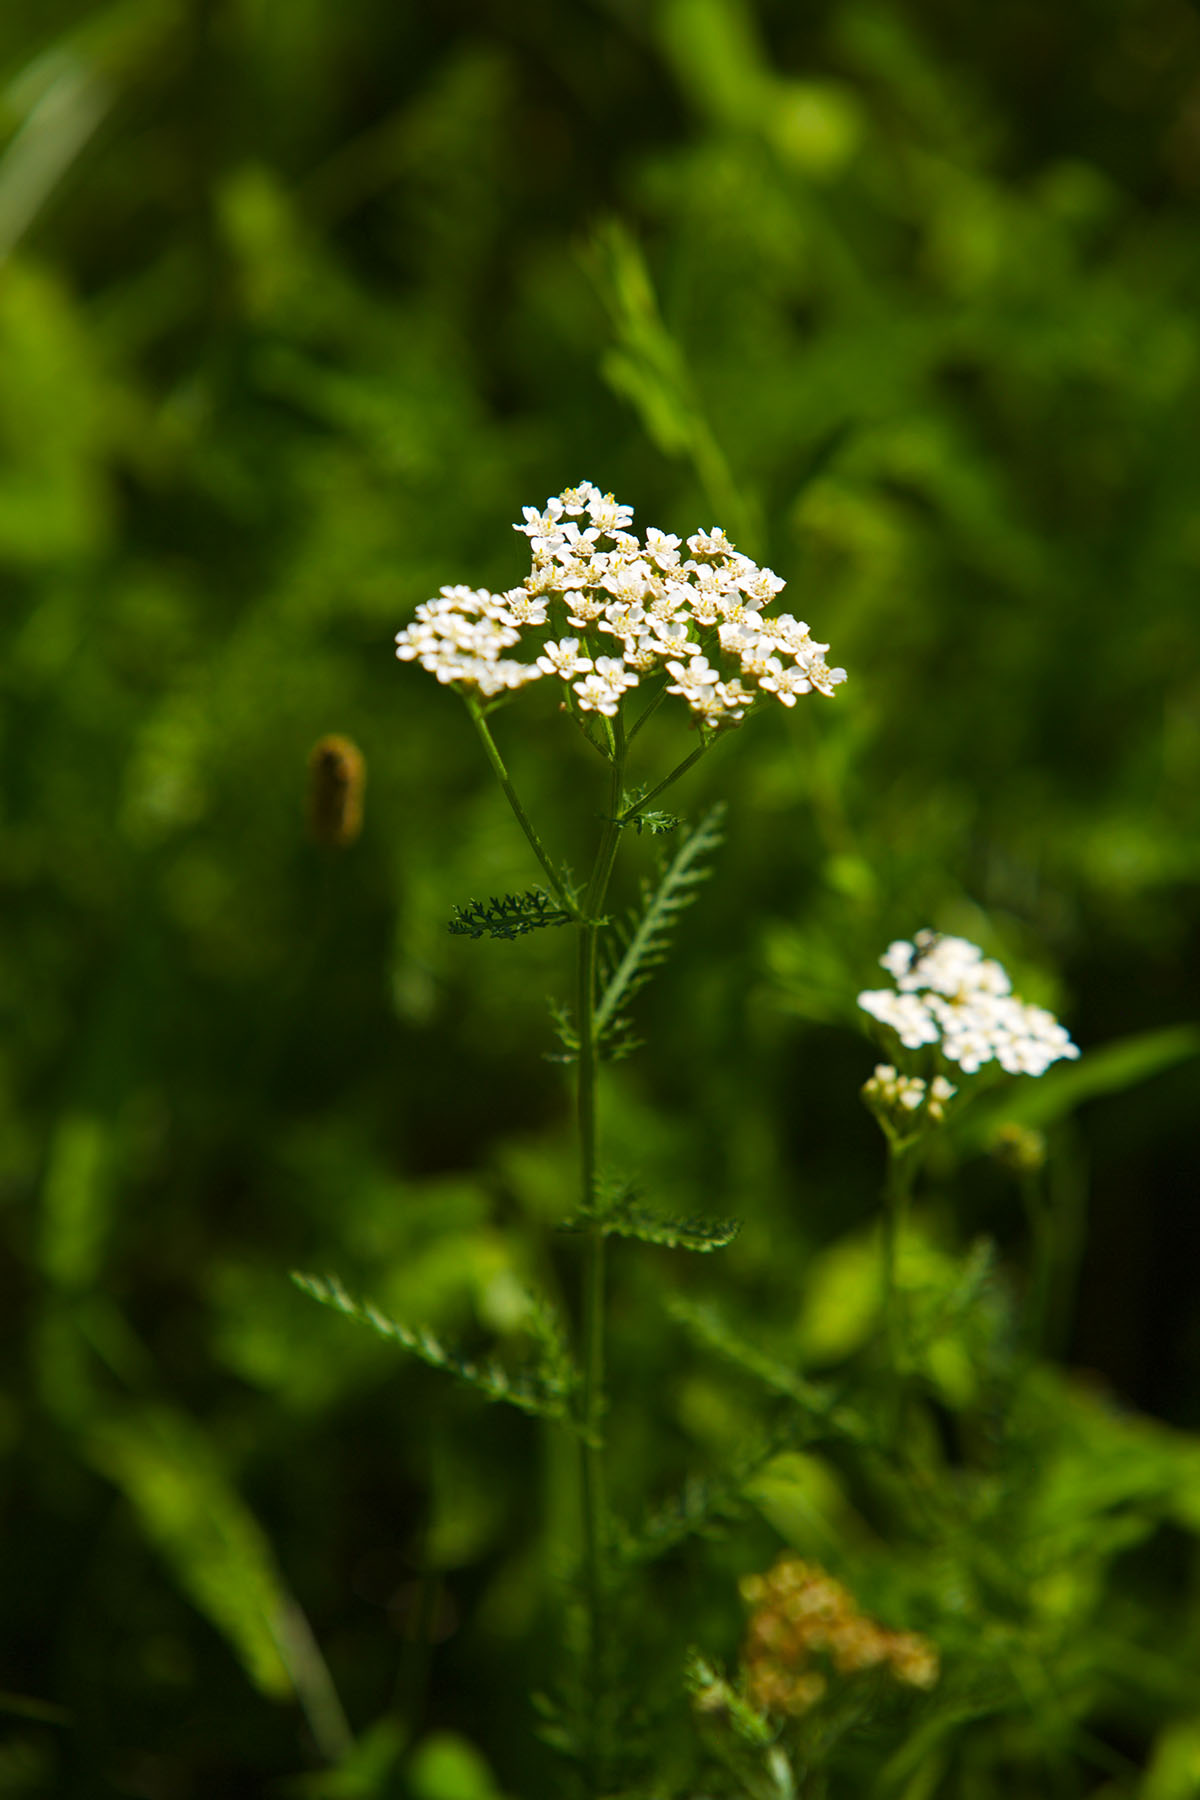 Adding Yarrow To Your Materia Medica | Herbal Academy | Would you like to add yarrow to your materia medica? Here's how to correctly identify and safely use this beneficial herb!